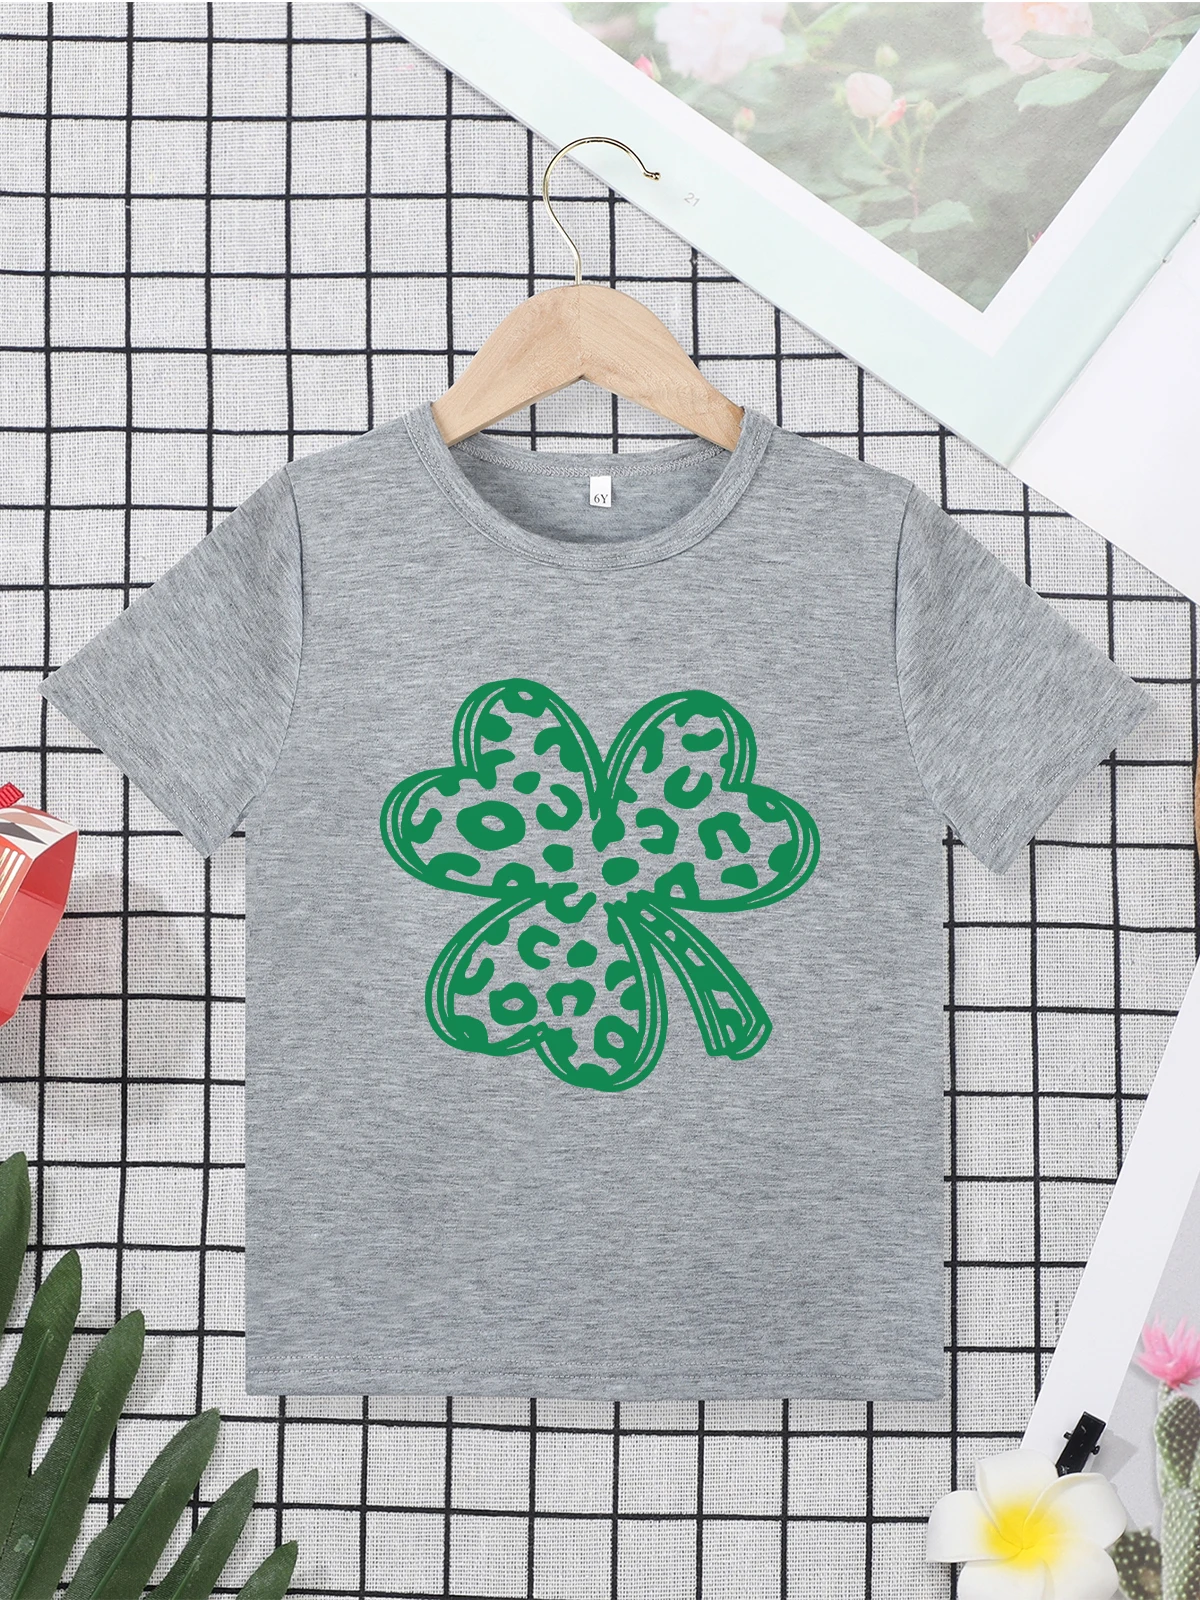 

Clover Print Aesthetic Boys and Girls Clothes 2 to 7 Years Grey Spring Summer Comfy Casual Tops O-neck Basic Tee Kids T Shirt